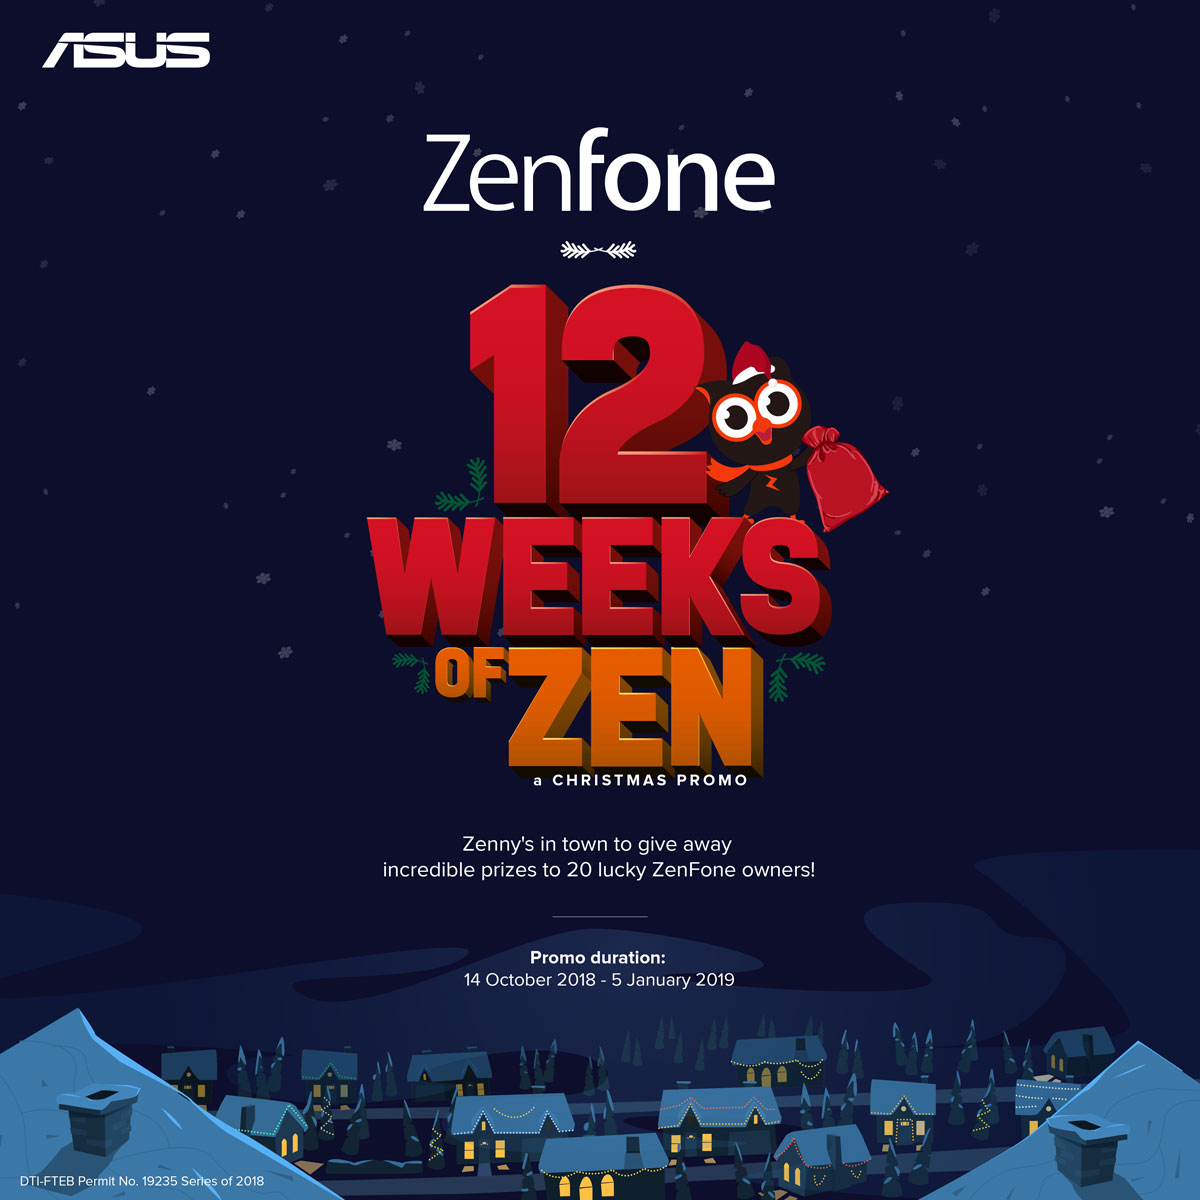 ASUS Philippines Wants You in Their 12 Weeks of Zen!